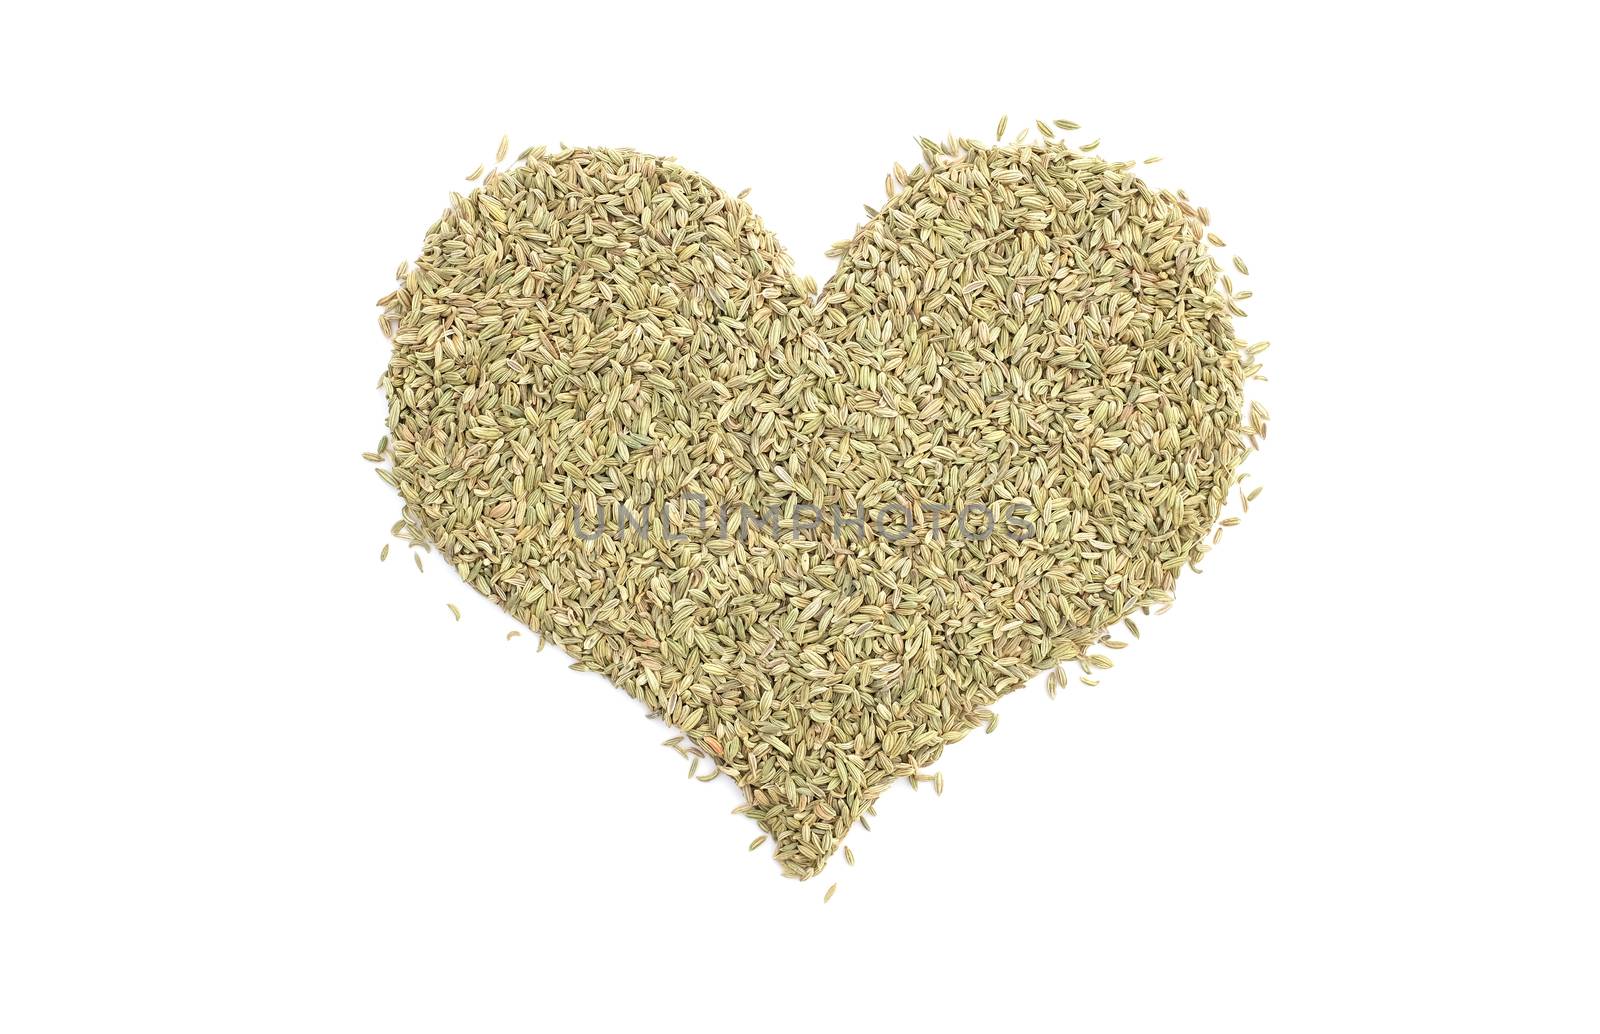 Fennel seeds in a heart shape, isolated on a white background